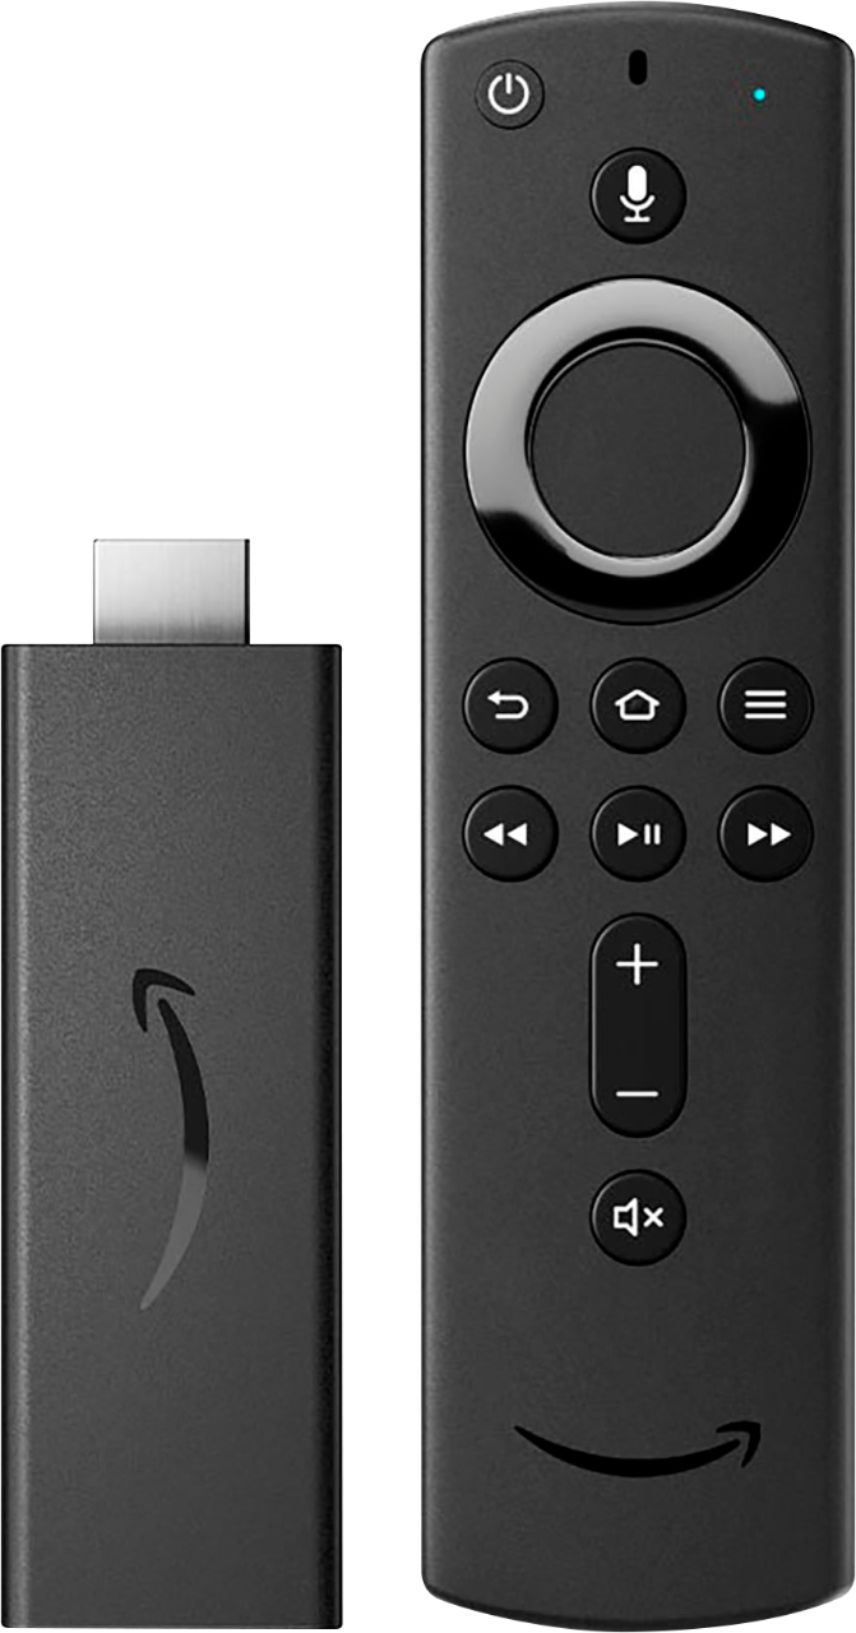 Best Buy: Amazon Fire TV Stick with Alexa Voice Remote and controls  (includes TV controls) | HD streaming device Black B07ZZVX1F2